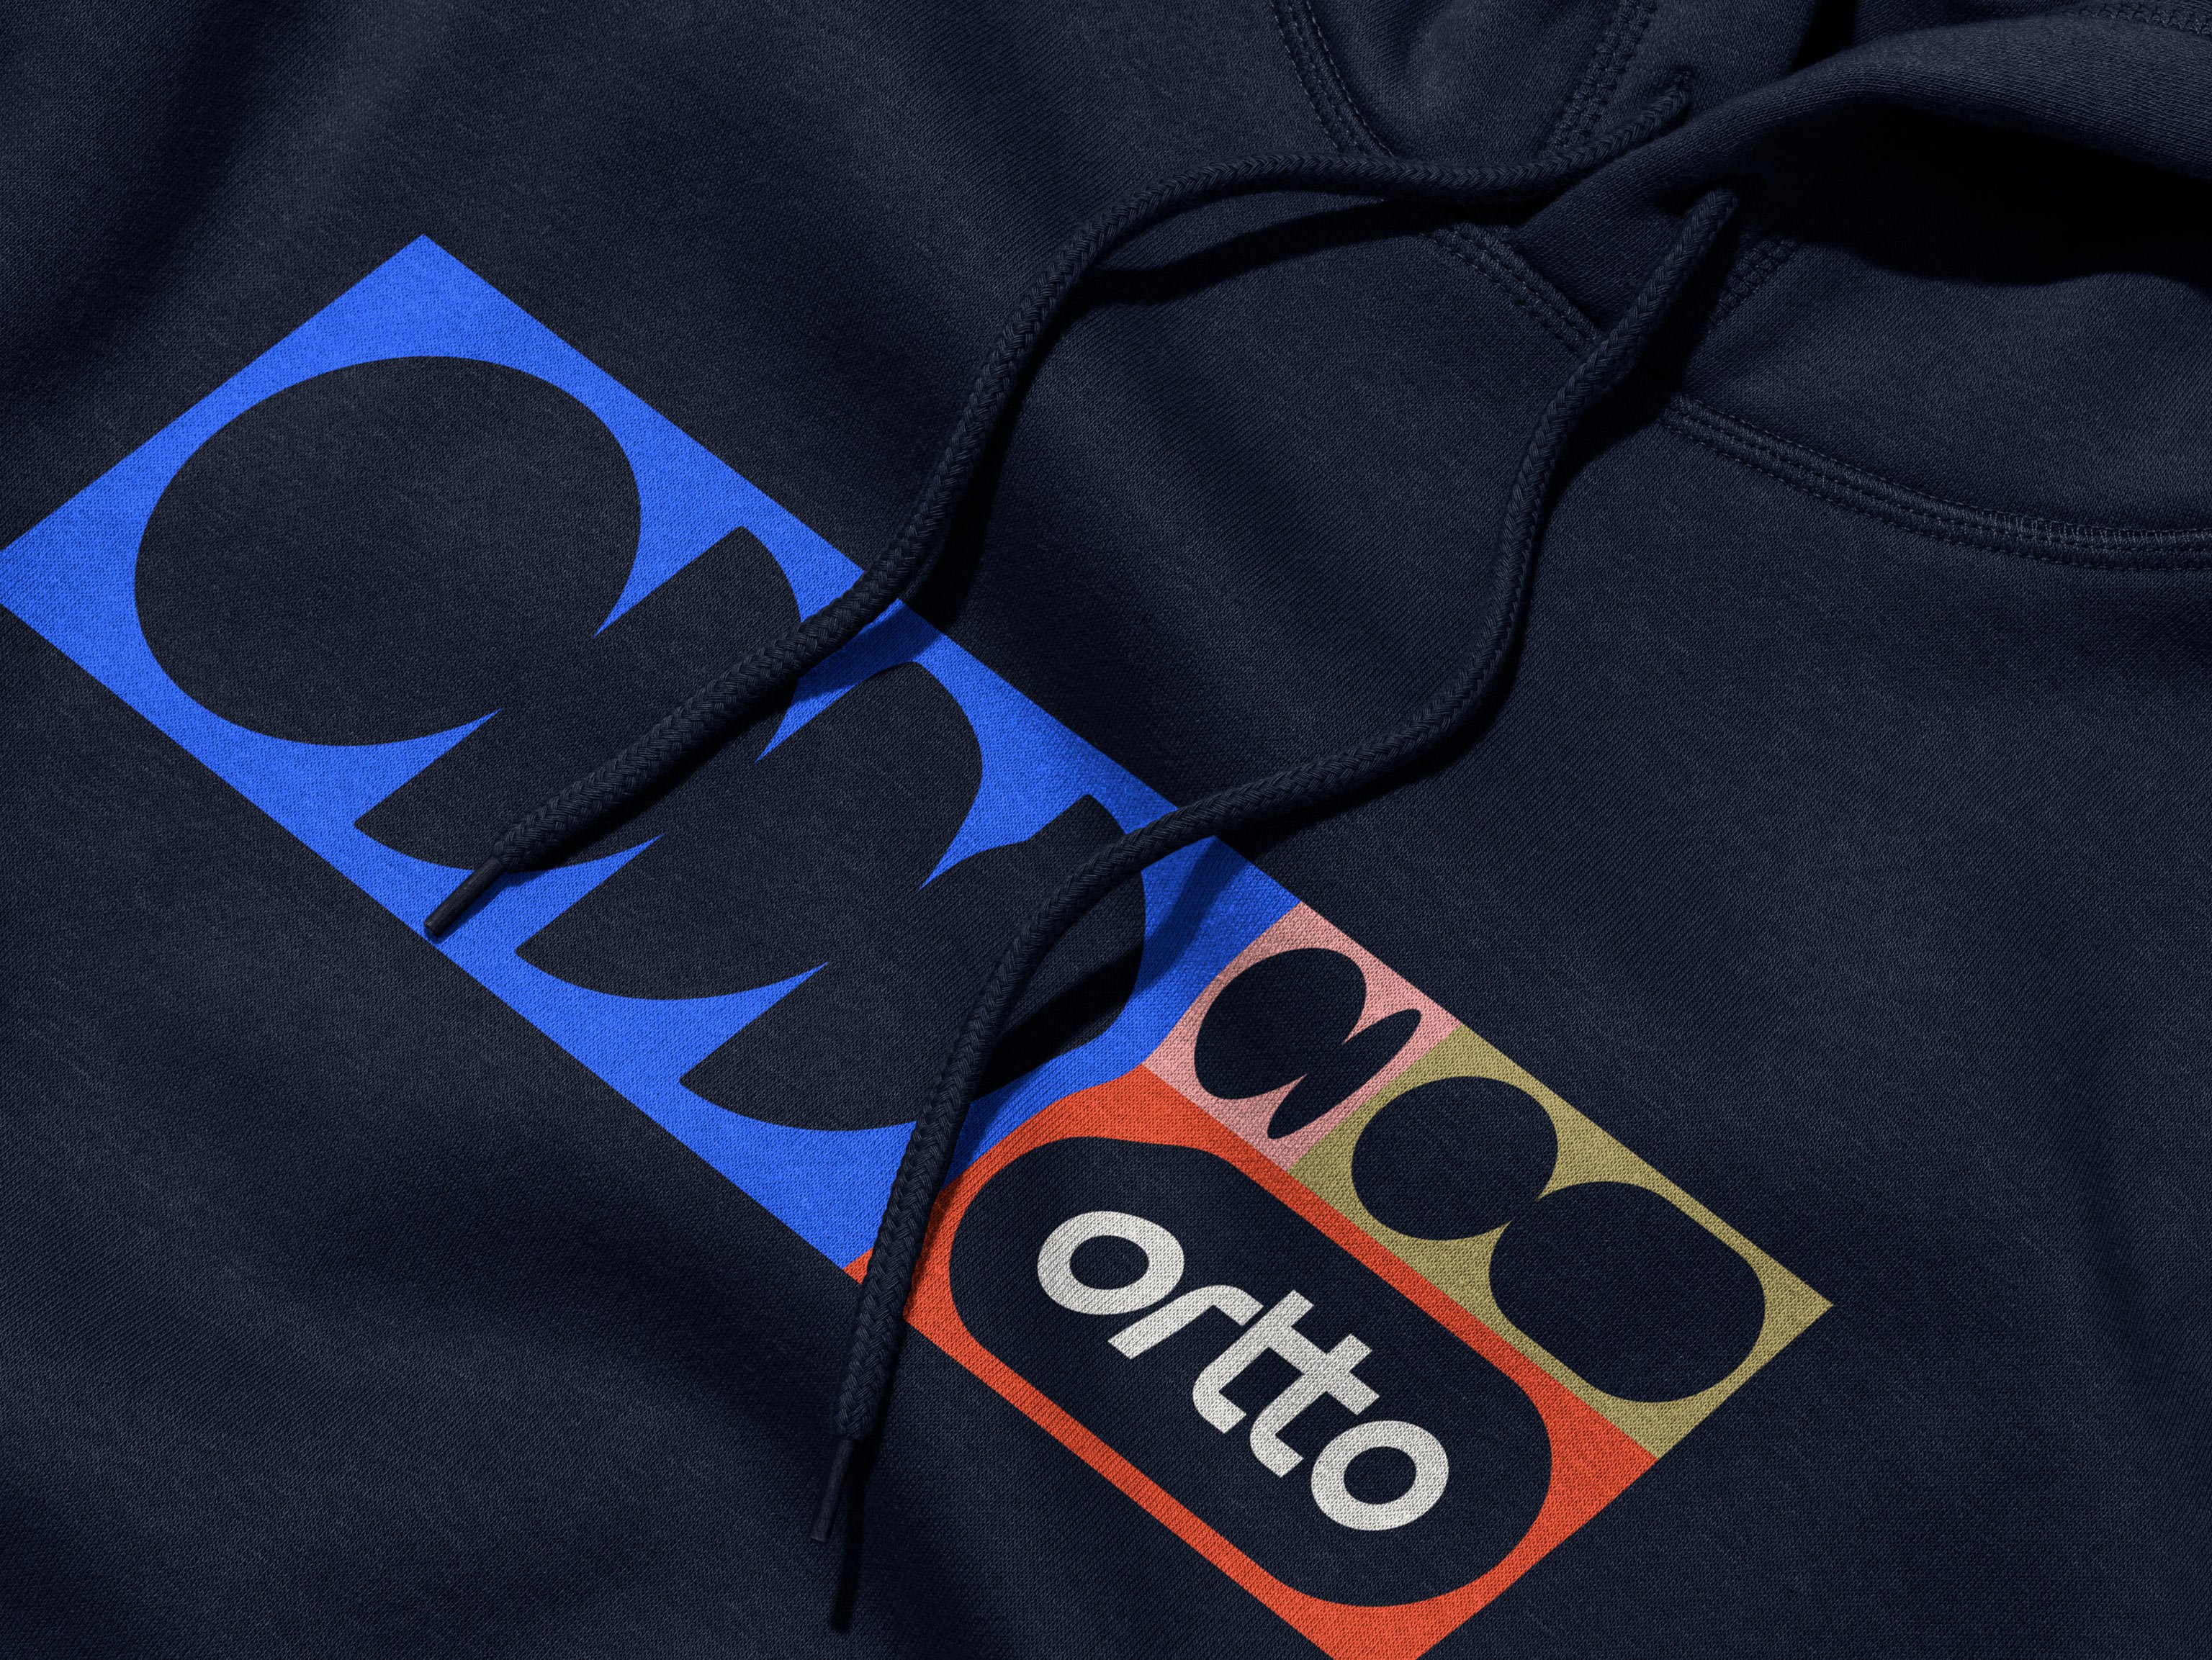 New logotype, brand identity and branded hoody for automation, analytics and customer journey company Ortto designed by Christopher Doyle & Co